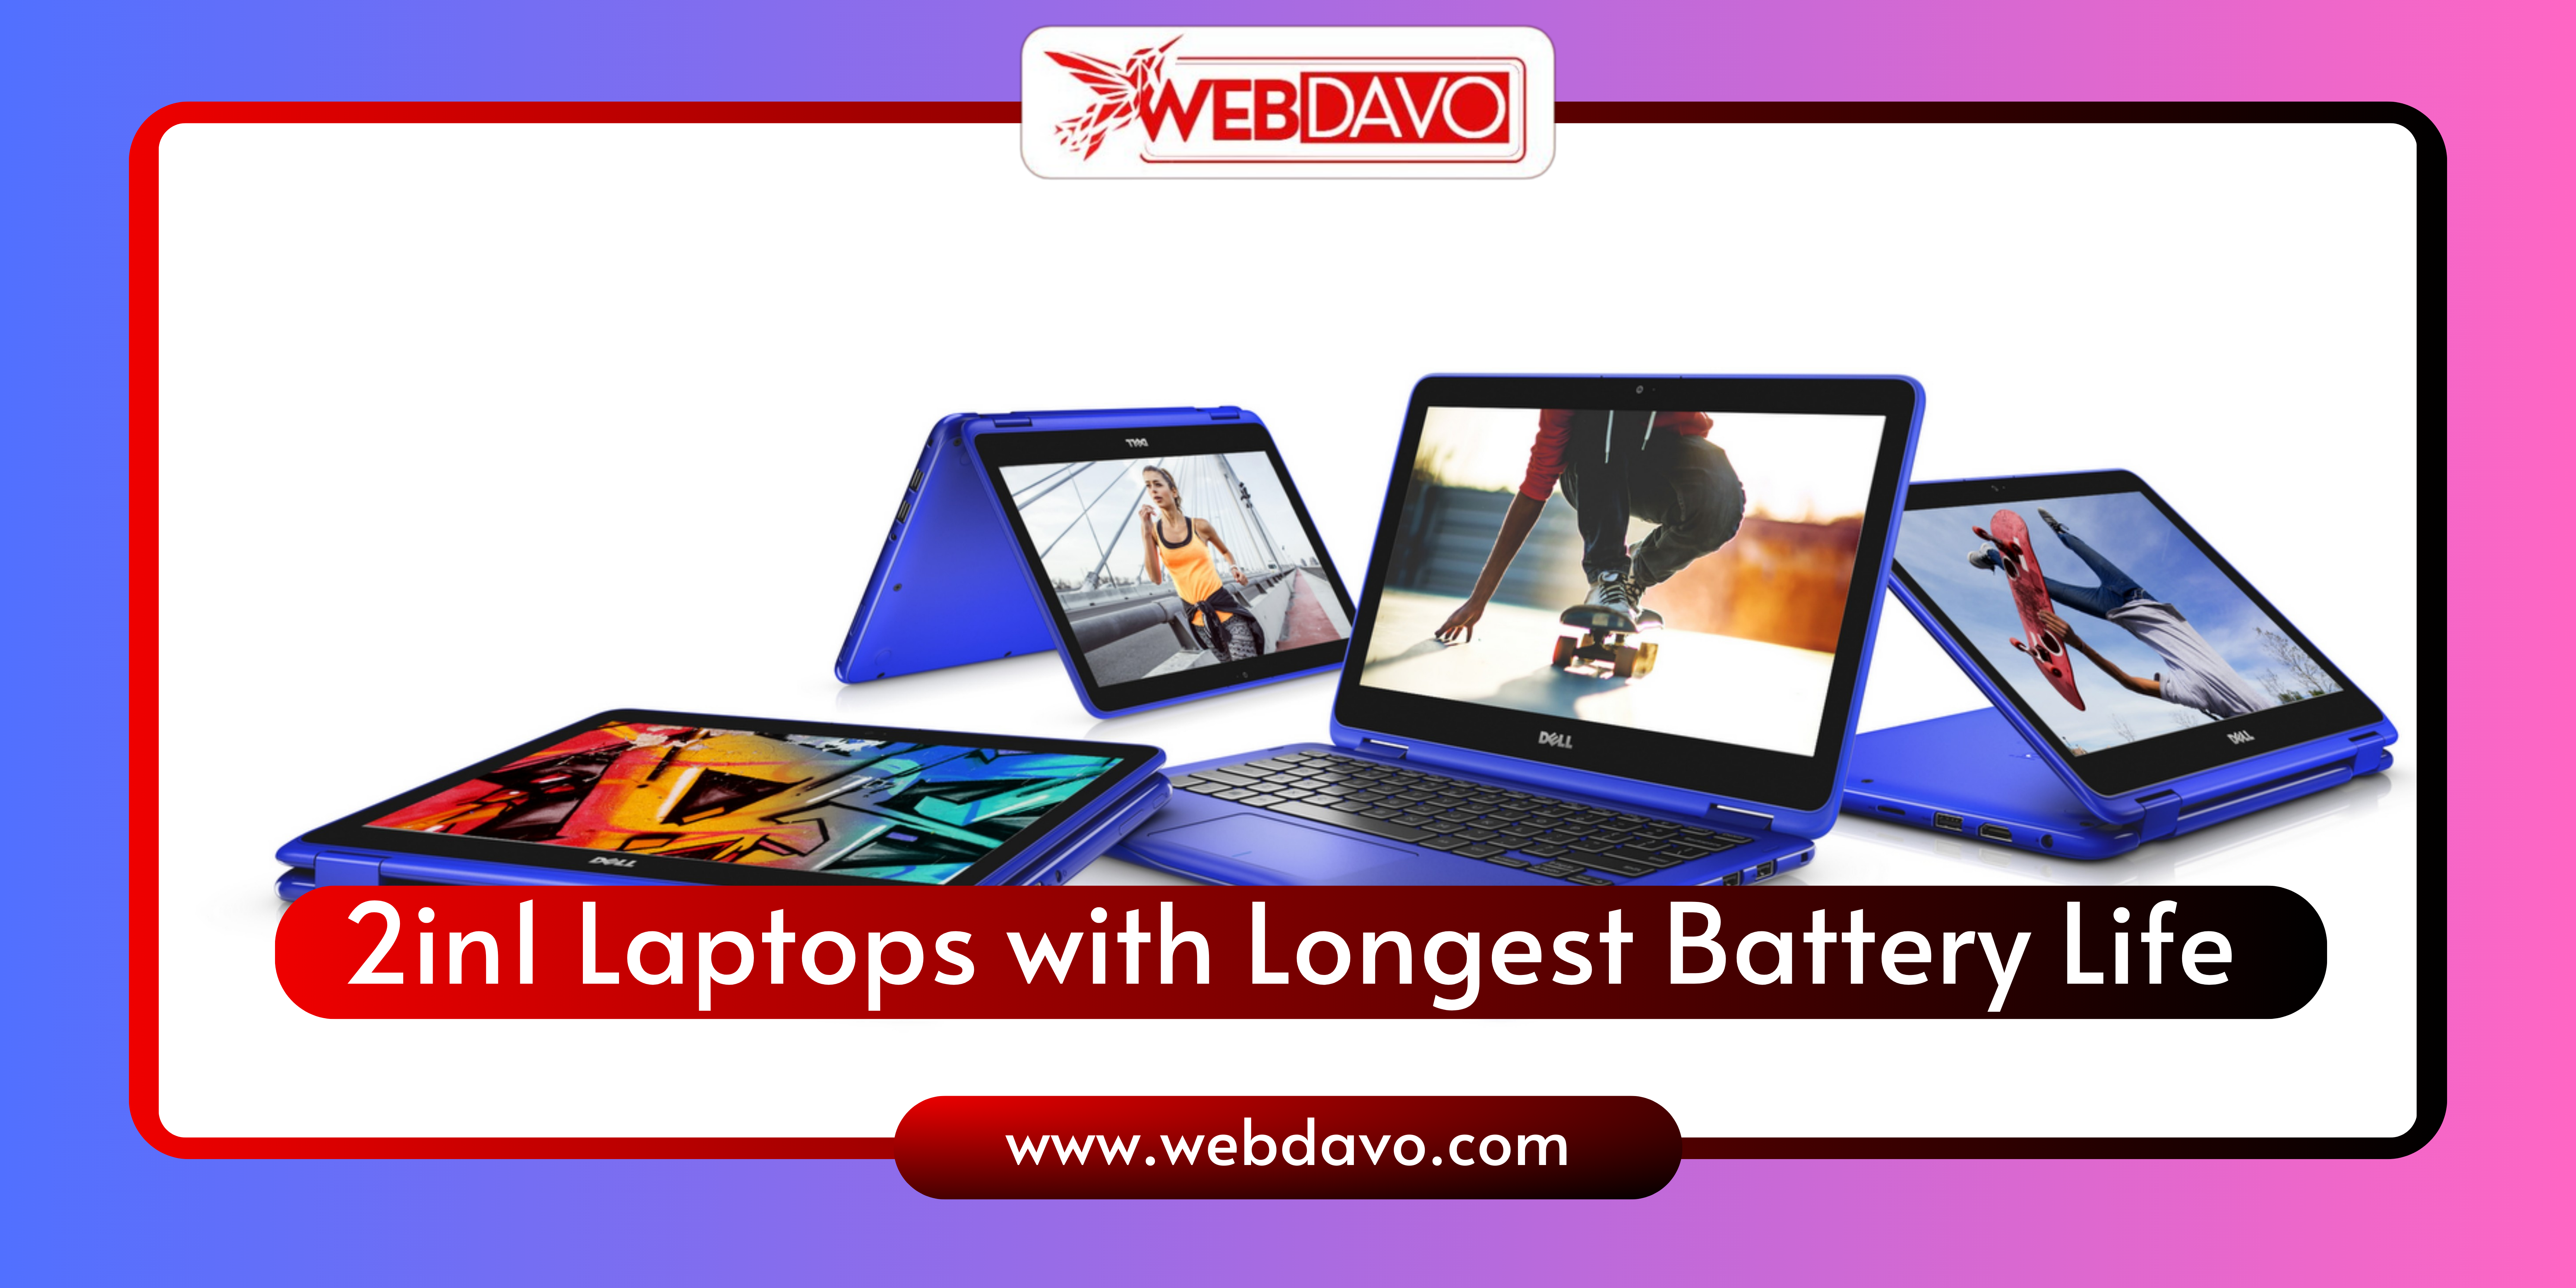 2in1 Laptops with Longest Battery Life